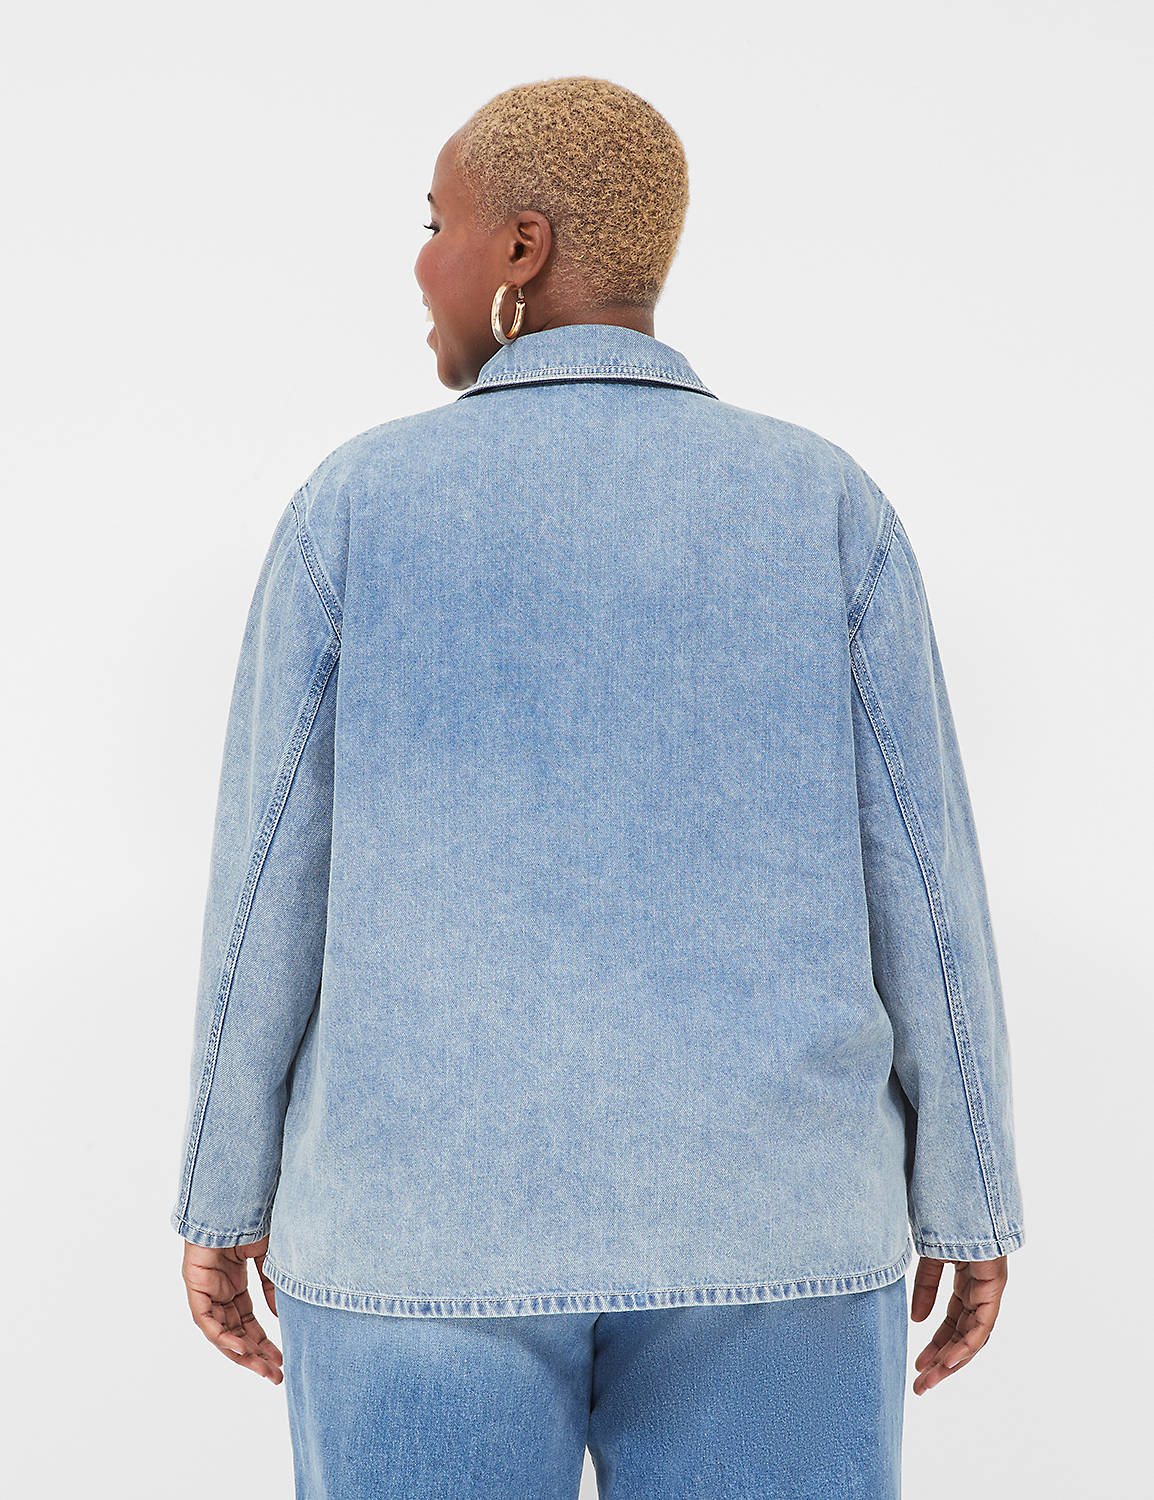 Relaxed LS Collared Denim Popover 1 Product Image 2